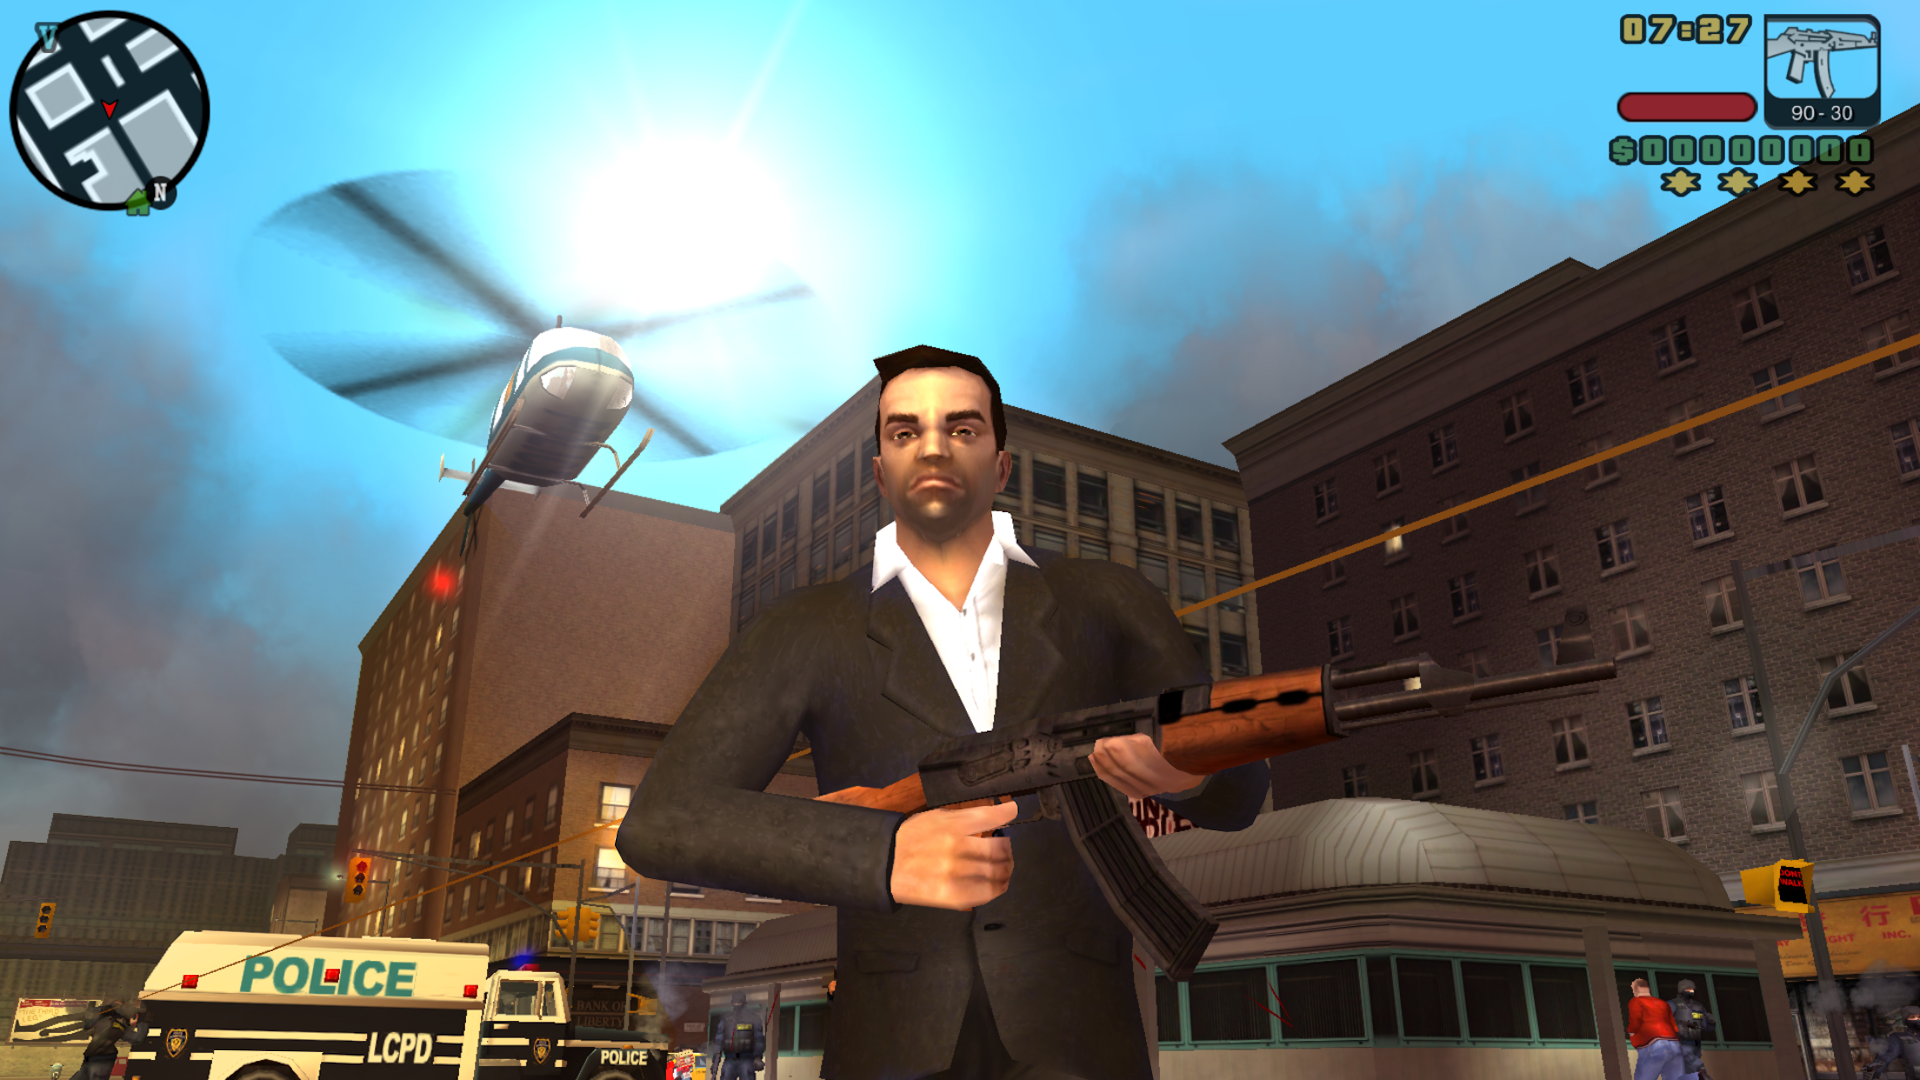 gta episodes from liberty city release date